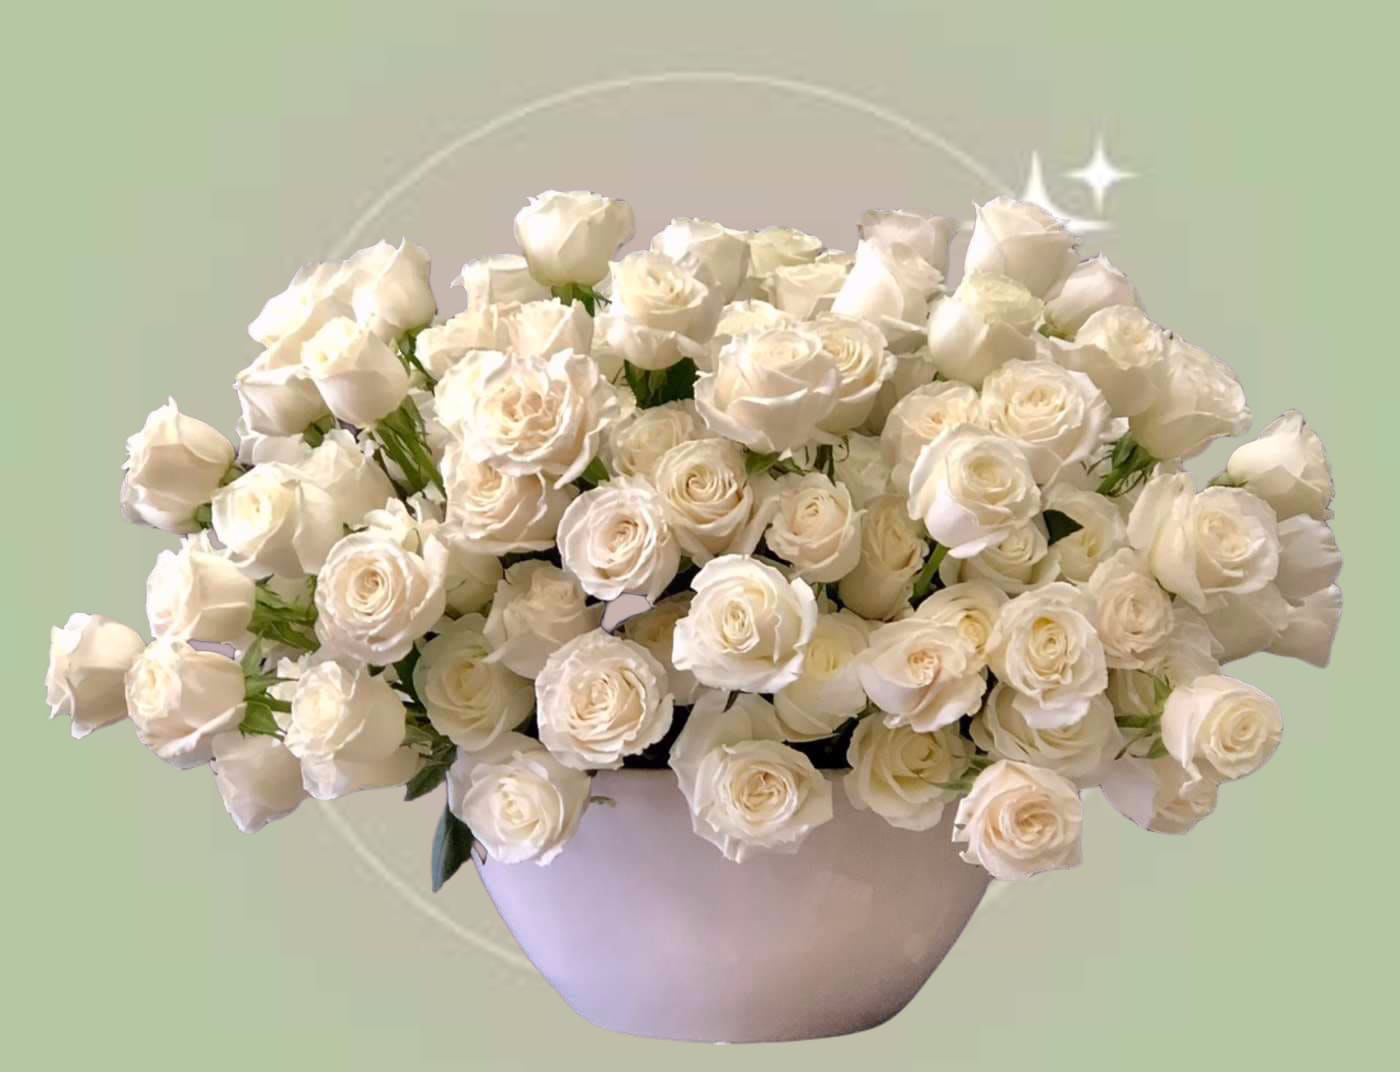 The White Classic - PLEASE NOTE: Although we make all the effort to create a floral arrangement as close to the photo shown, the actual arrangement delivered may vary slightly in its appearance from the photo shown. If you have any questions about your order, we welcome you to call us in or email us to discuss further. Thank you!